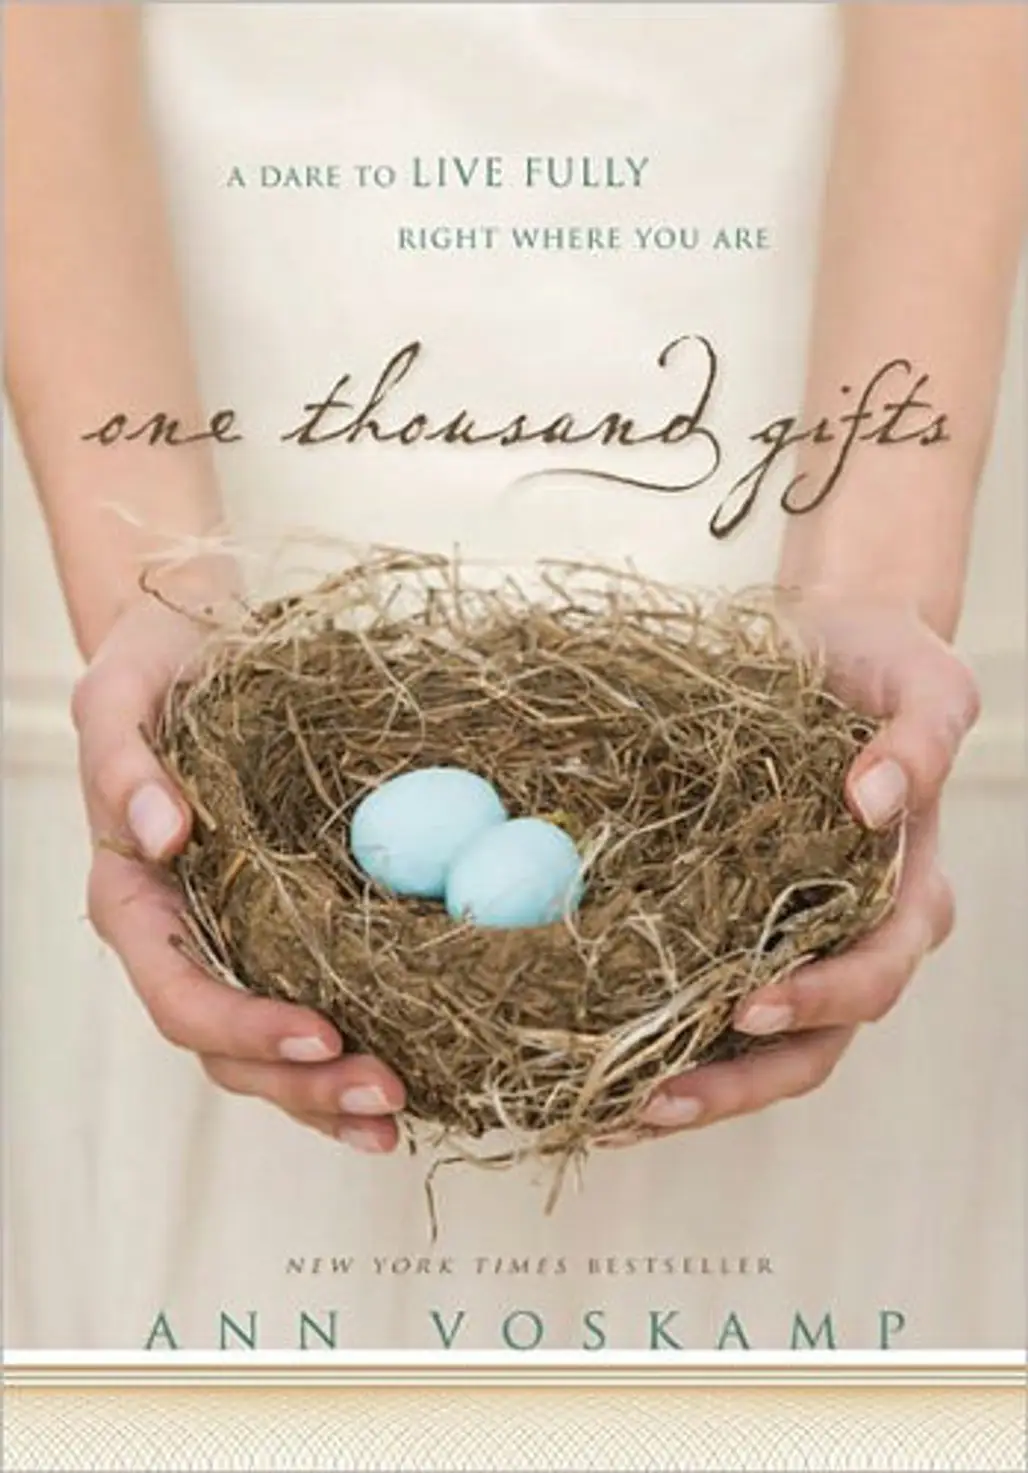 “One Thousand Gifts” by Ann Voskamp